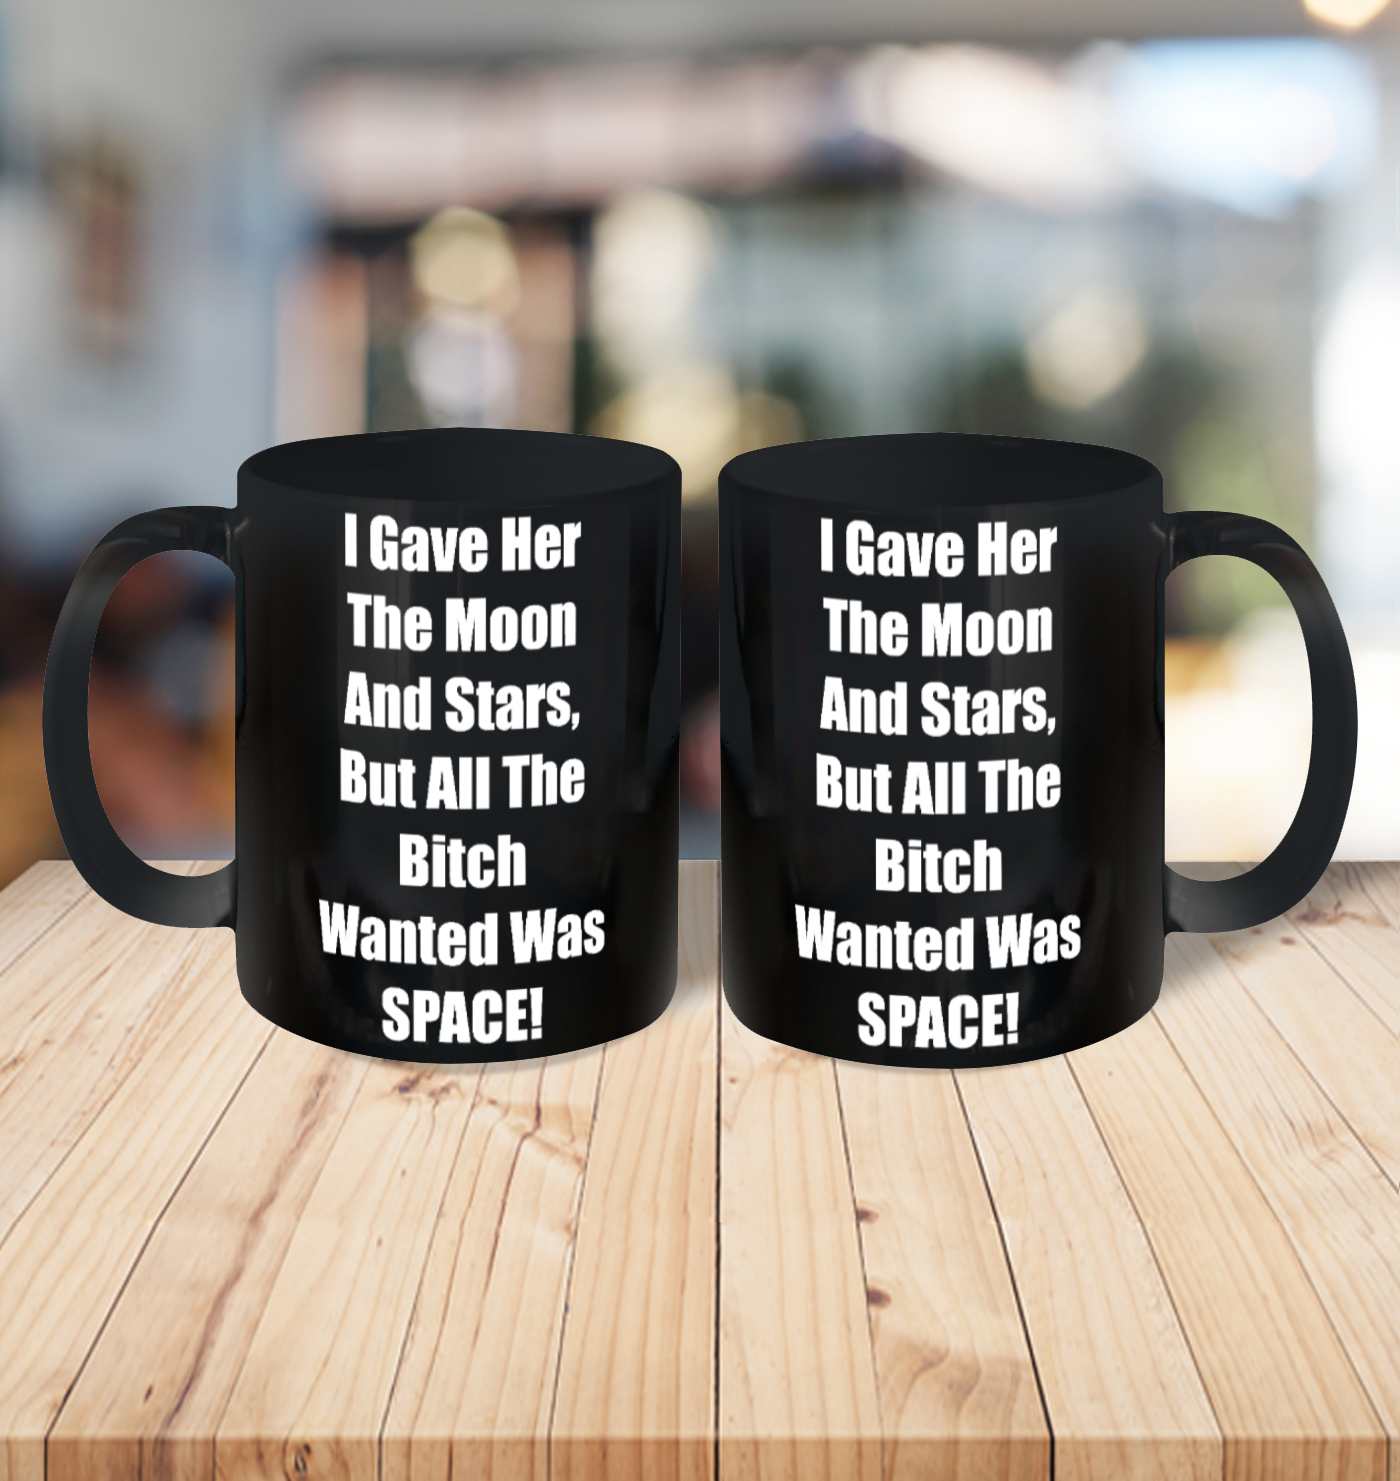 I Gave Her The Moon And Stars, The Bitch Wanted Was SPACE Ceramic Mug 11oz 6